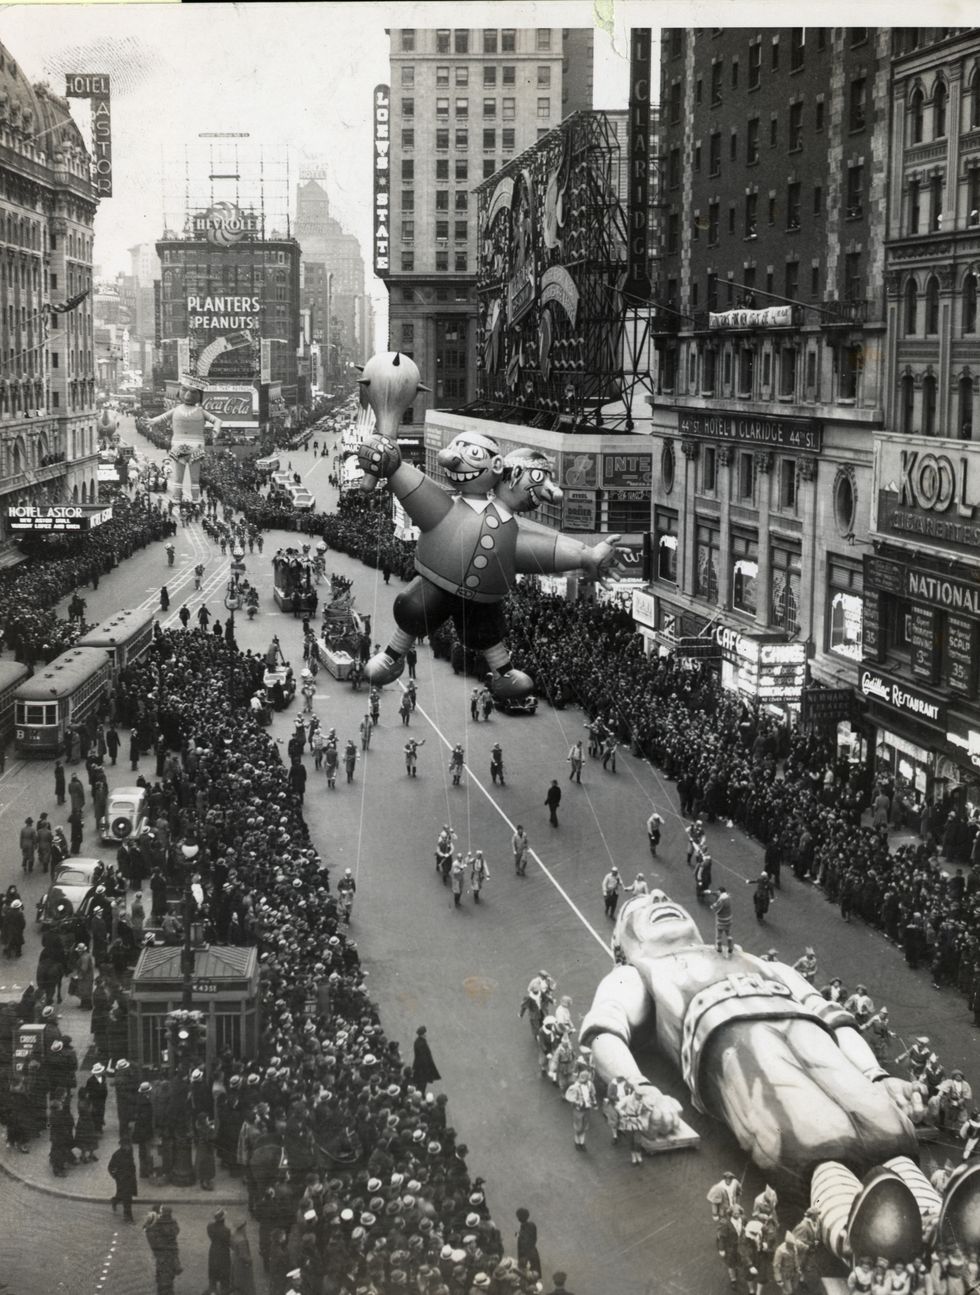 These Vintage Photos of New York City Will Make You Want to Time Travel